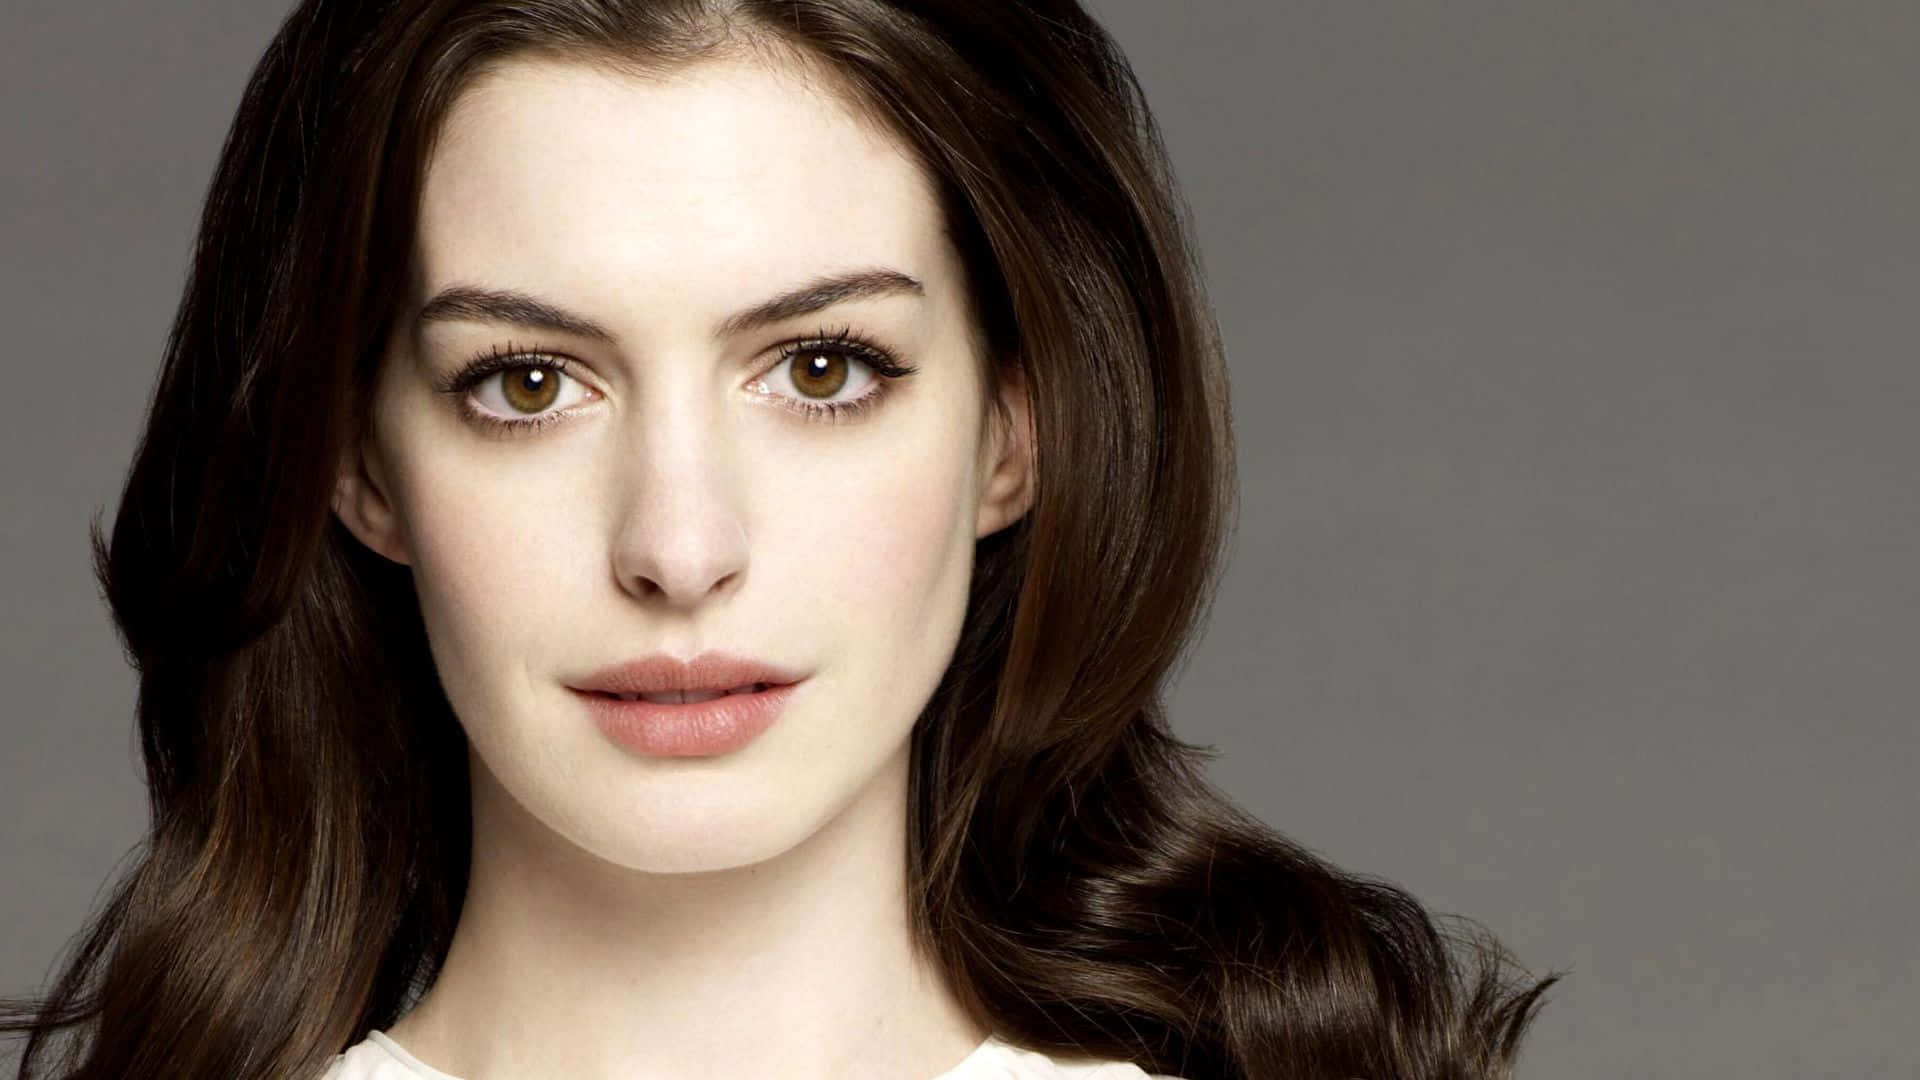 Anne Hathaway radiating beauty and grace.